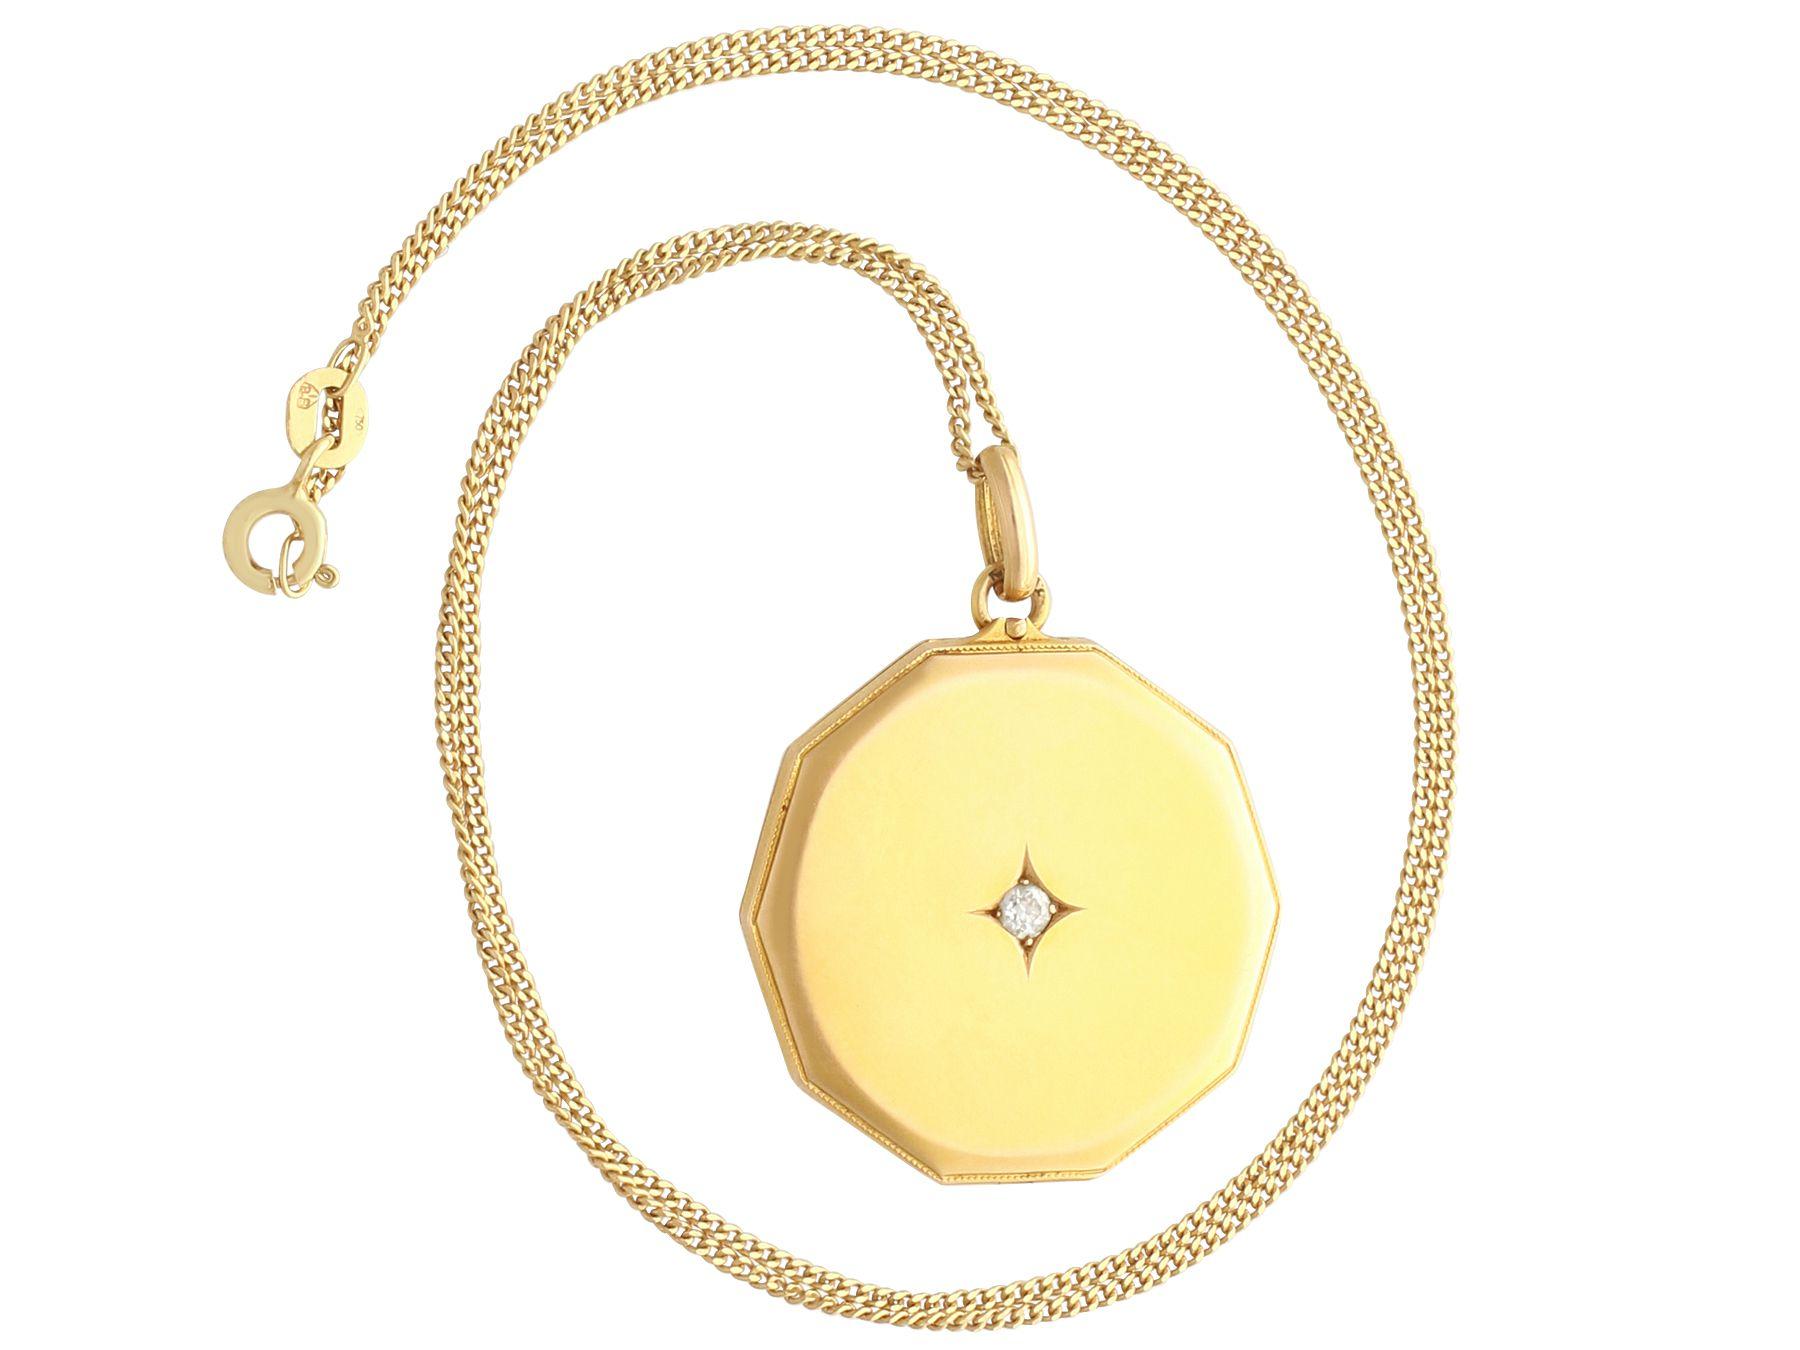 A fine and impressive antique 1920s 0.08 carat diamond and 14 karat yellow gold locket pendant; part of our diverse collection of antique lockets

This fine and impressive antique locket has been crafted in 14k yellow gold.

The antique gold locket